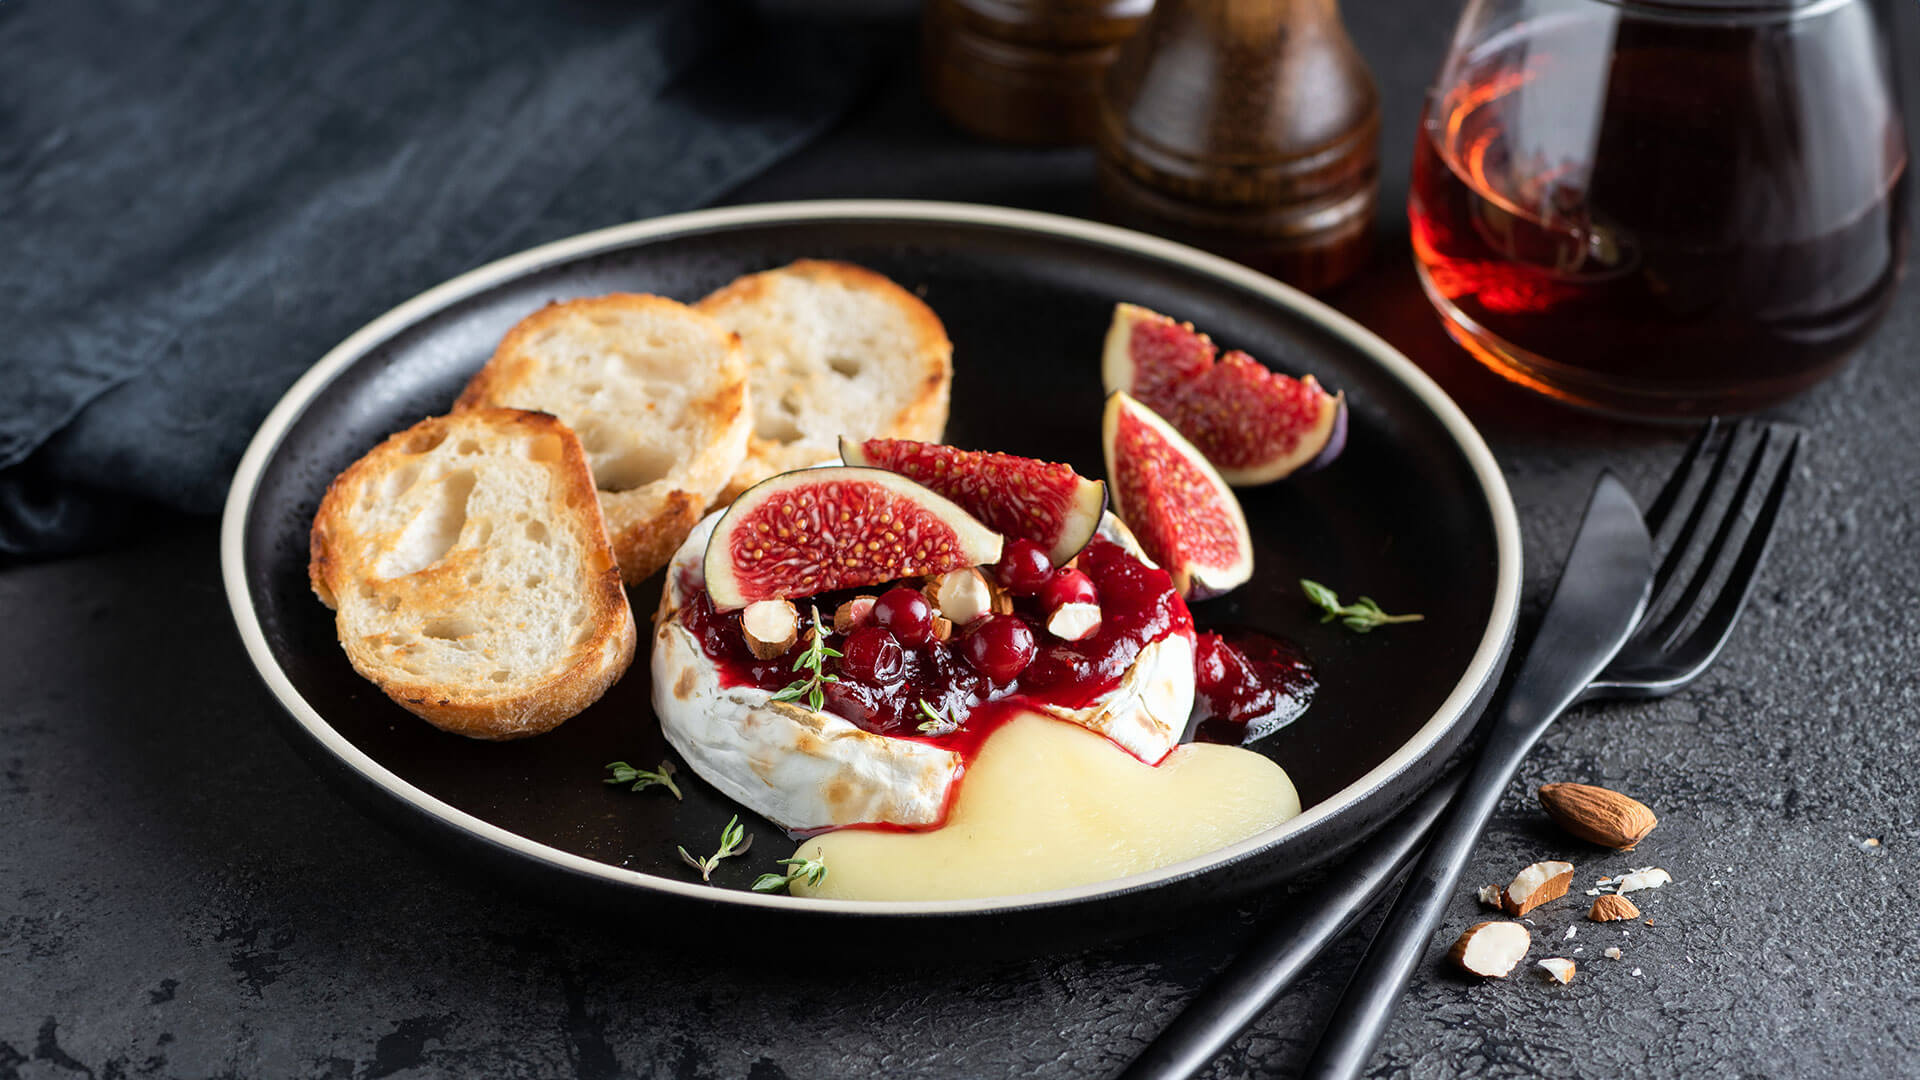 Red Pepper Jelly Baked Brie Recipe with Figs, Cranberry and mini toast paired with red wine. 